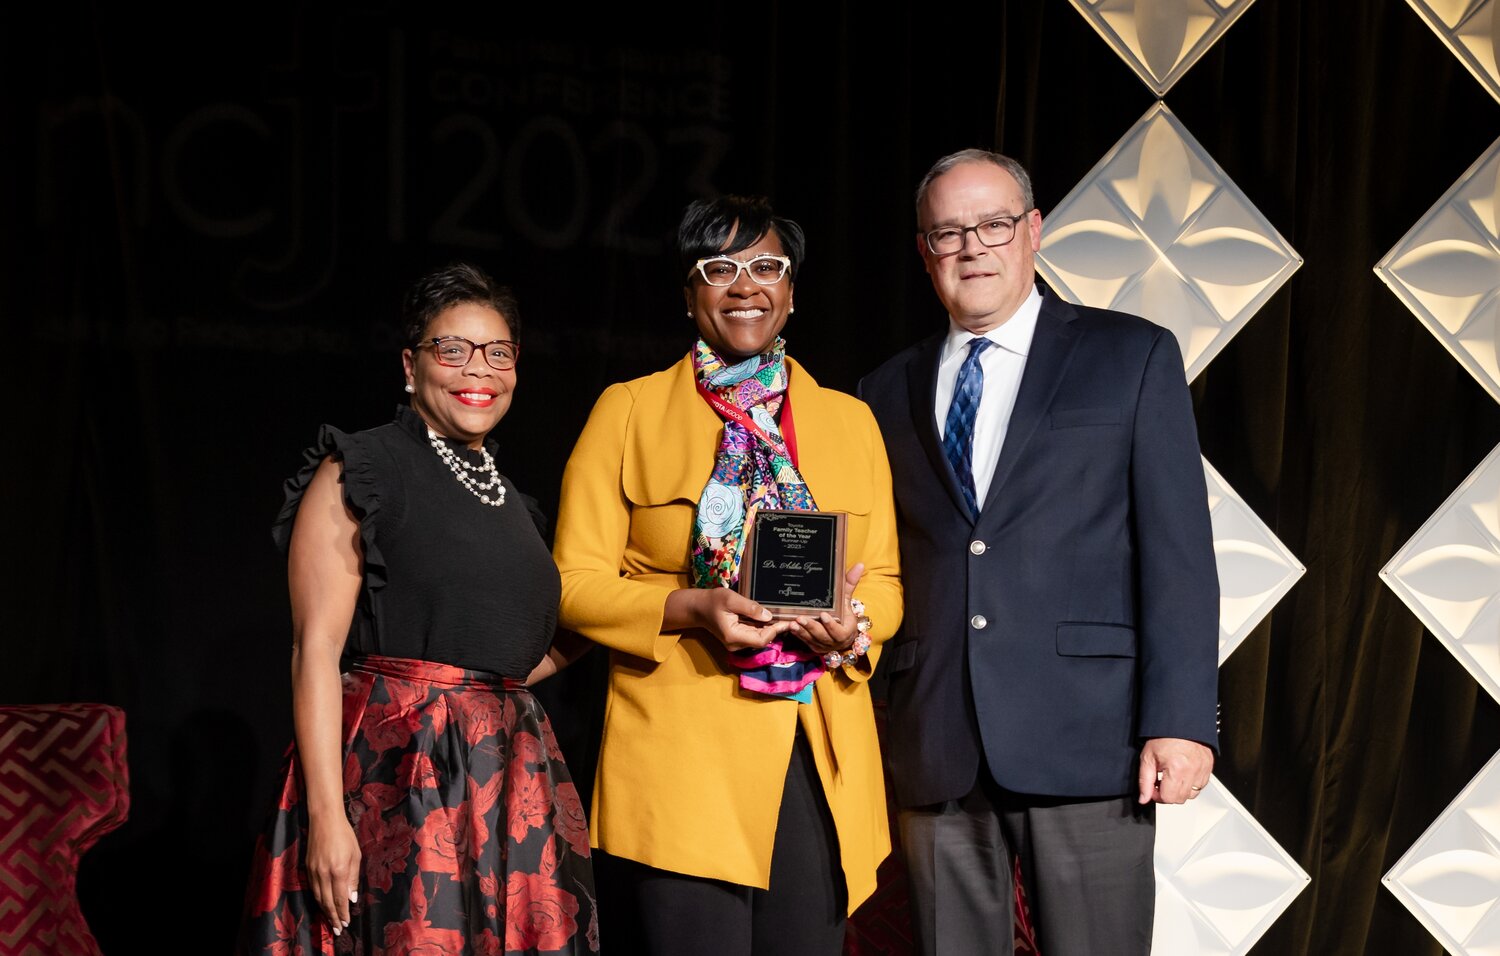 Dr. Artika R. Tyner (center), founder of Planting People Growing Justice Leadership Institute (PPGJLI), was recognized as the 2023 Toyota Family Teacher of the Year. A lawyer, author, and activist, Dr. Tyner’s institute in St. Paul, strives to dismantle the school-to-prison pipeline by addressing the reading crisis, promoting diverse books, and preserving cultures. Her passion stems from her civil rights legal work, noticing many clients learned to read while incarcerated. This accolade fuels her mission to expand PPGJLI’s impact locally and nationally. (Photo submitted)